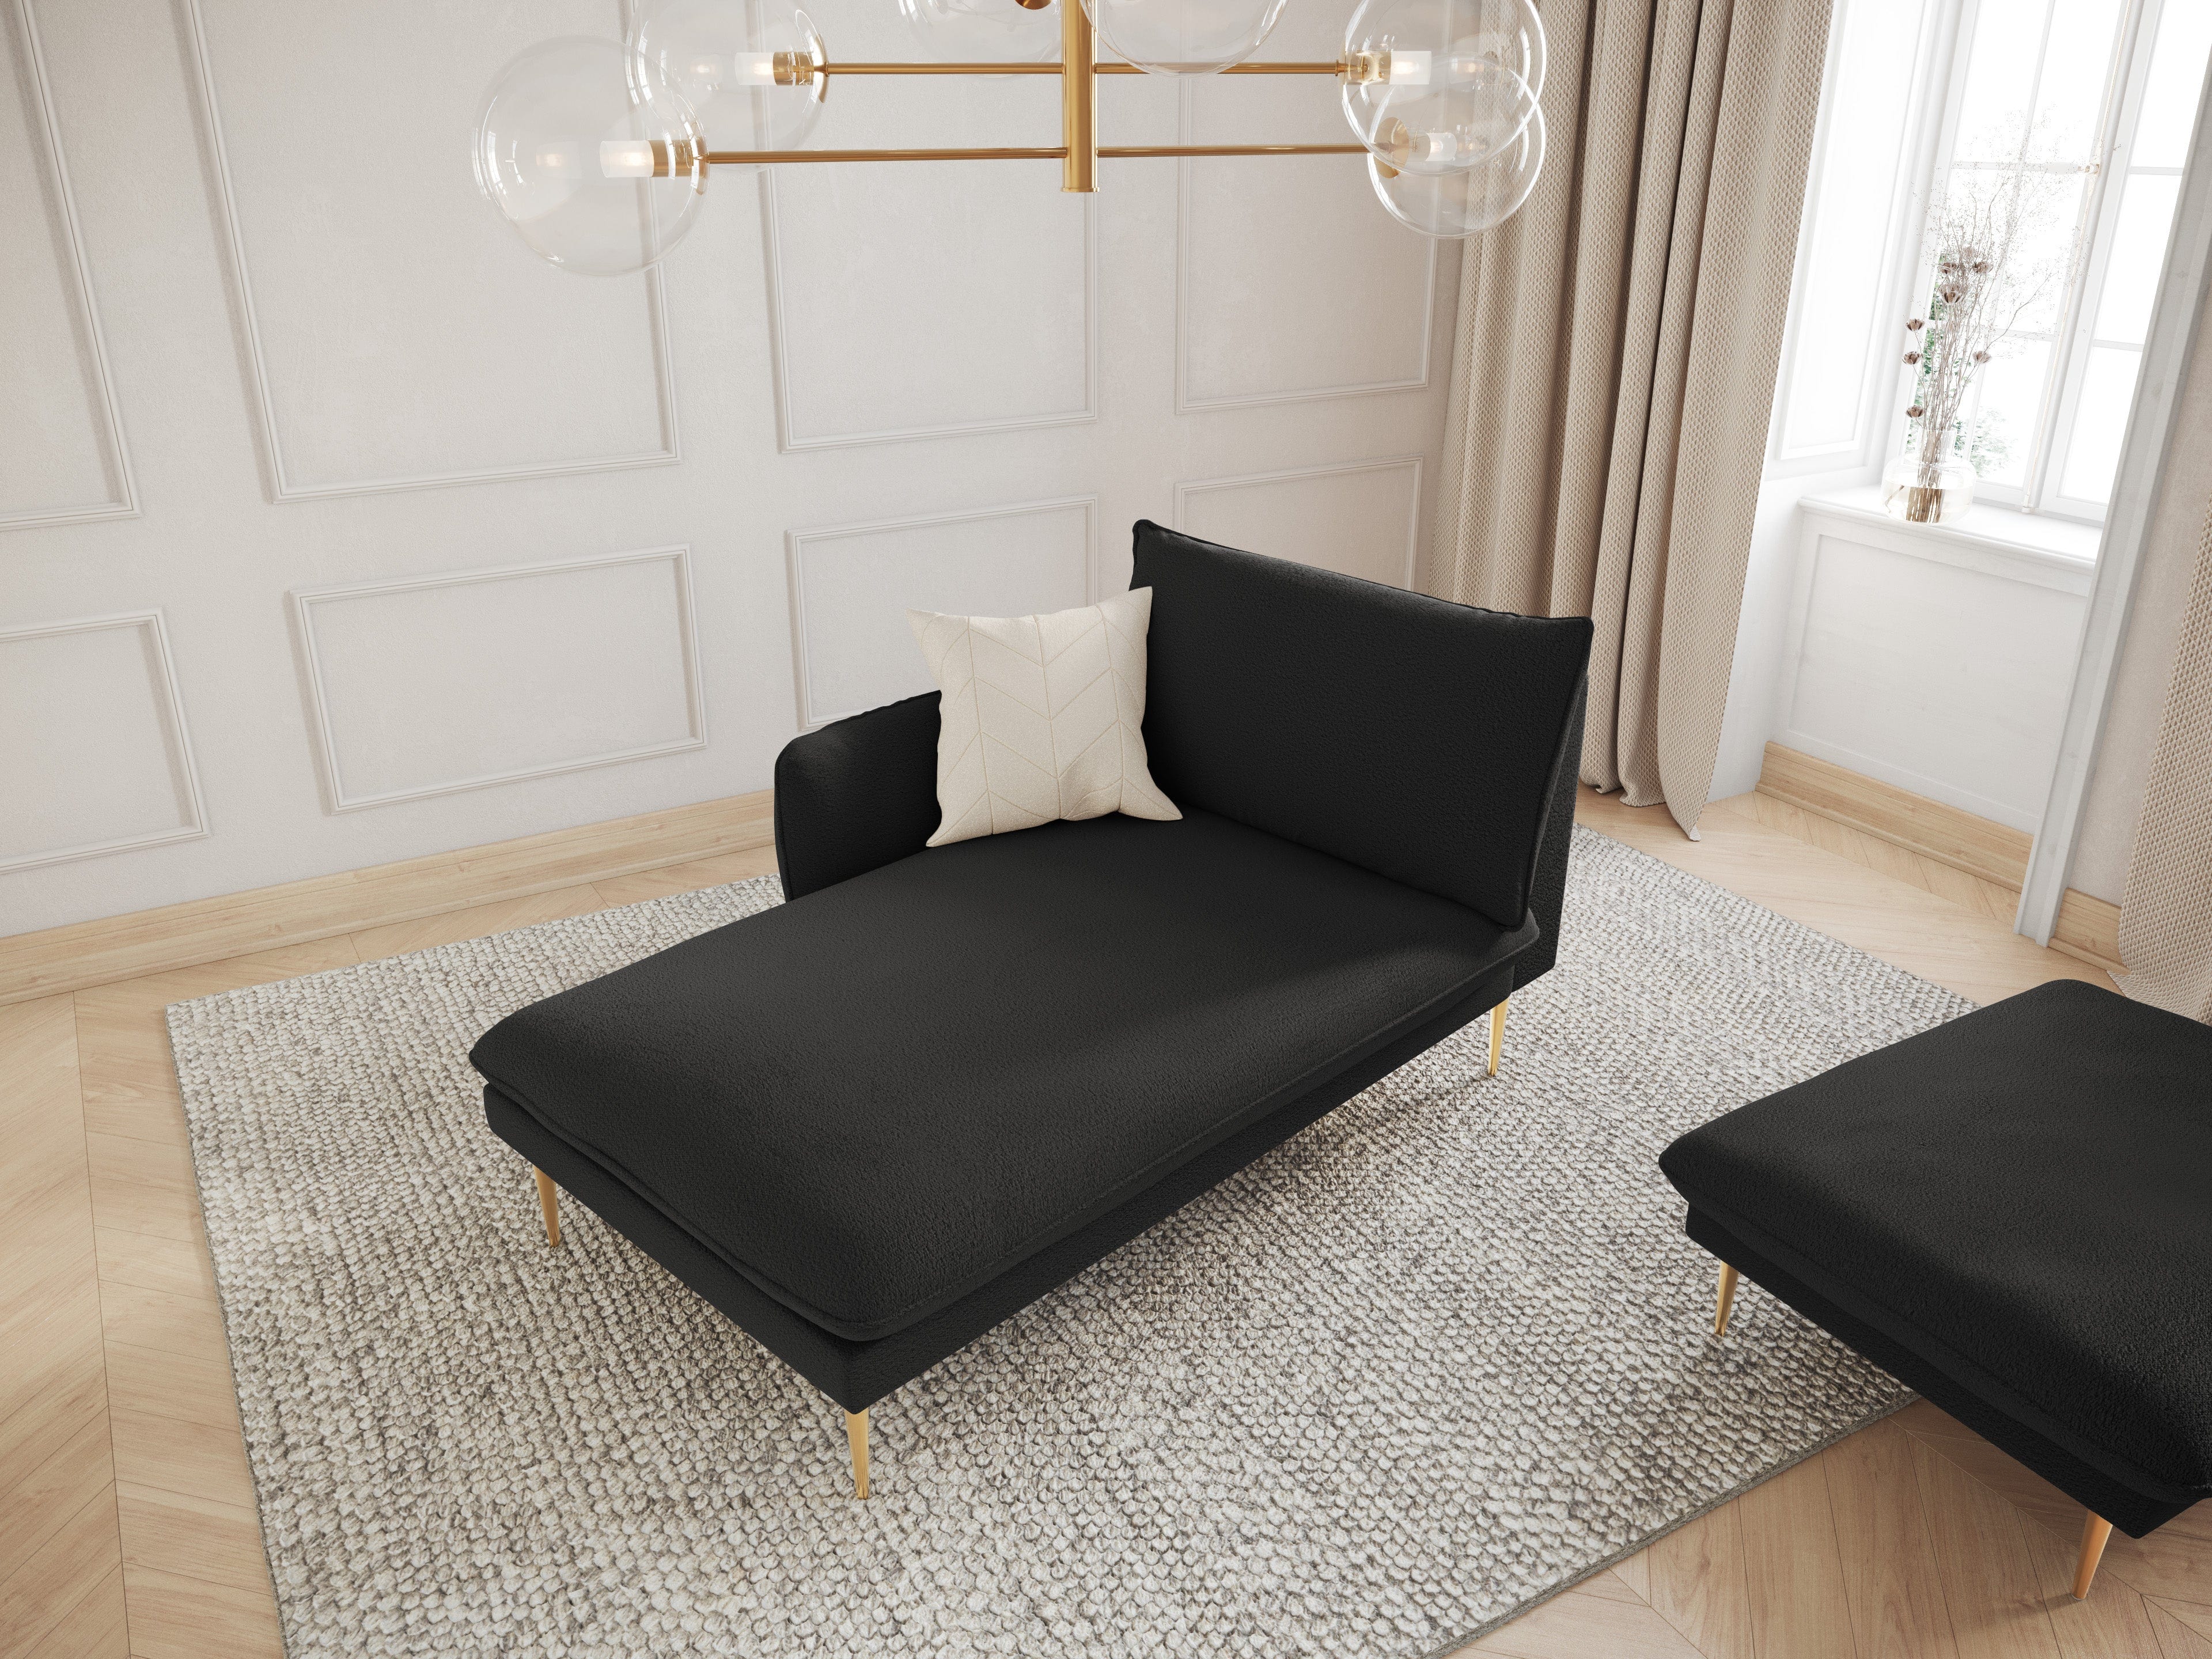 VIENNA chaise longue in boucle fabric left side black with gold base